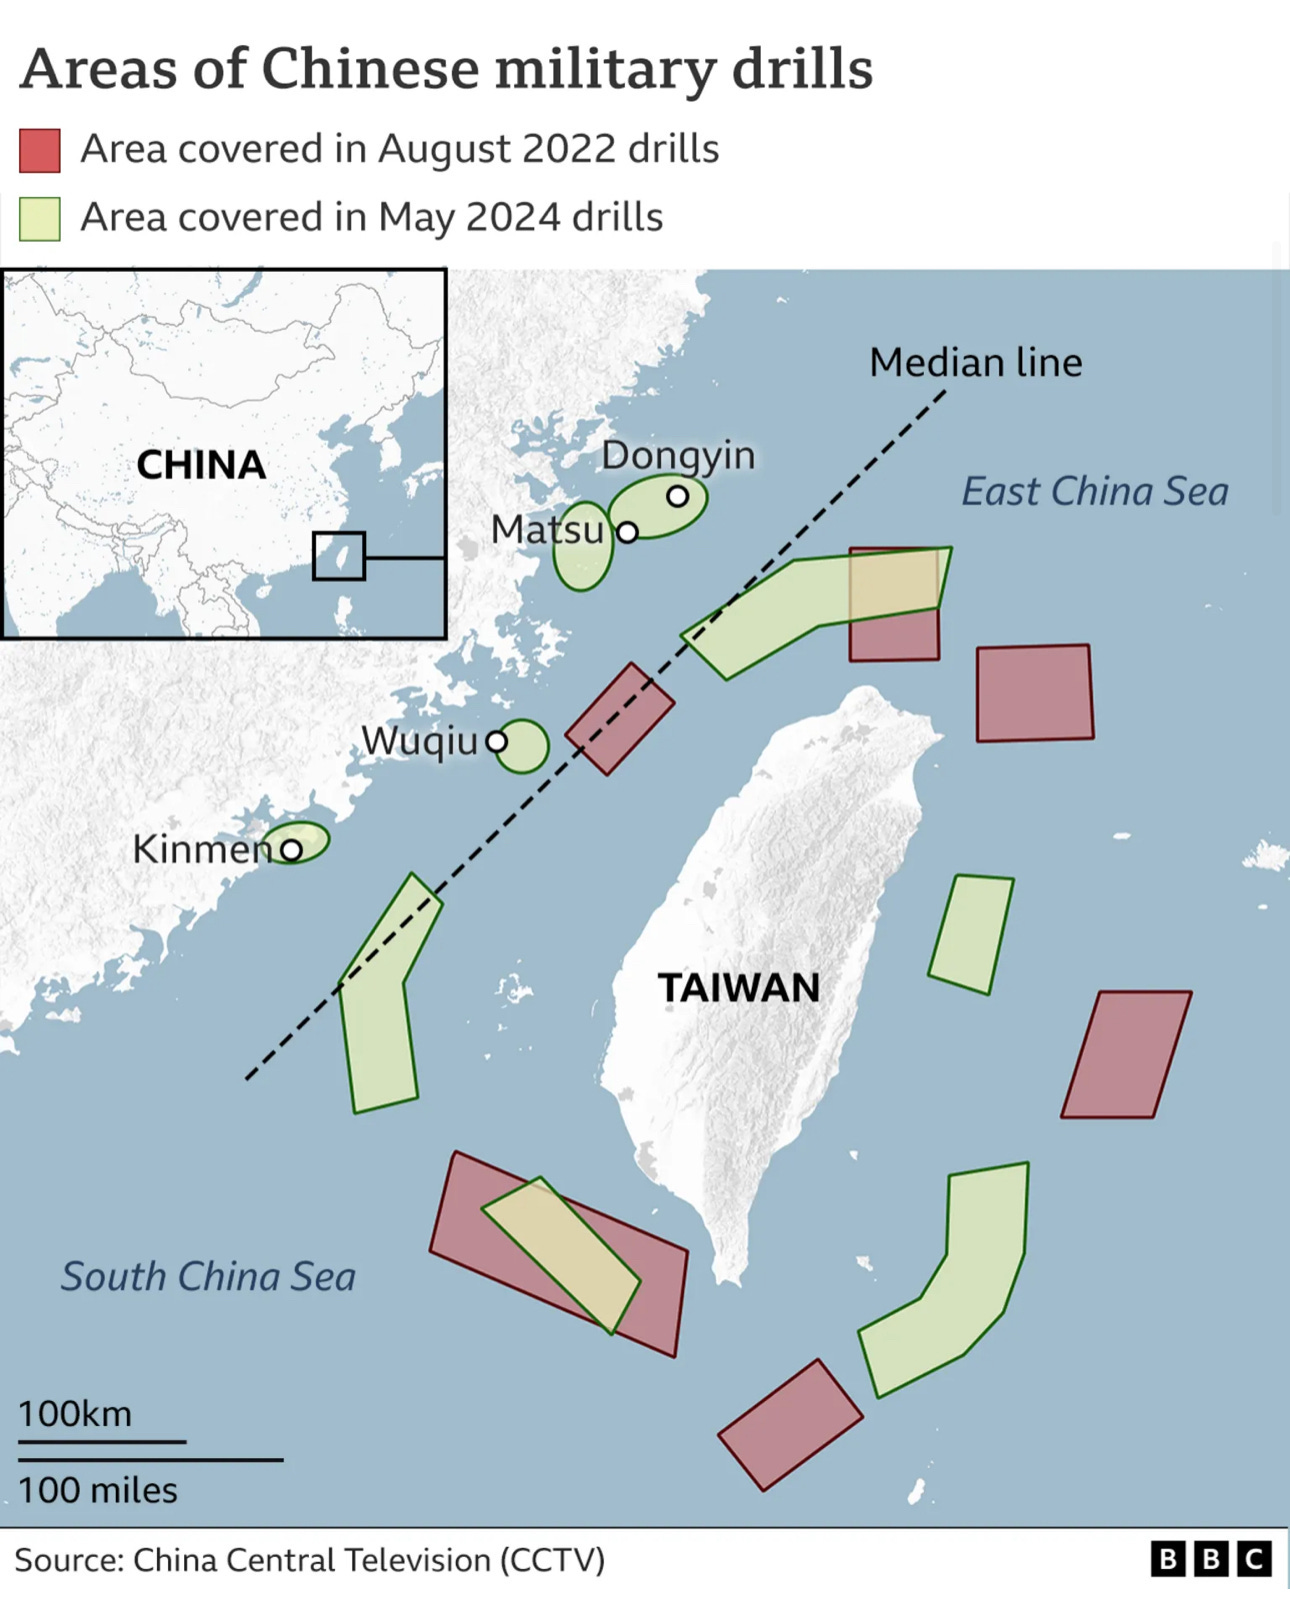 A map of the east china sea

Description automatically generated